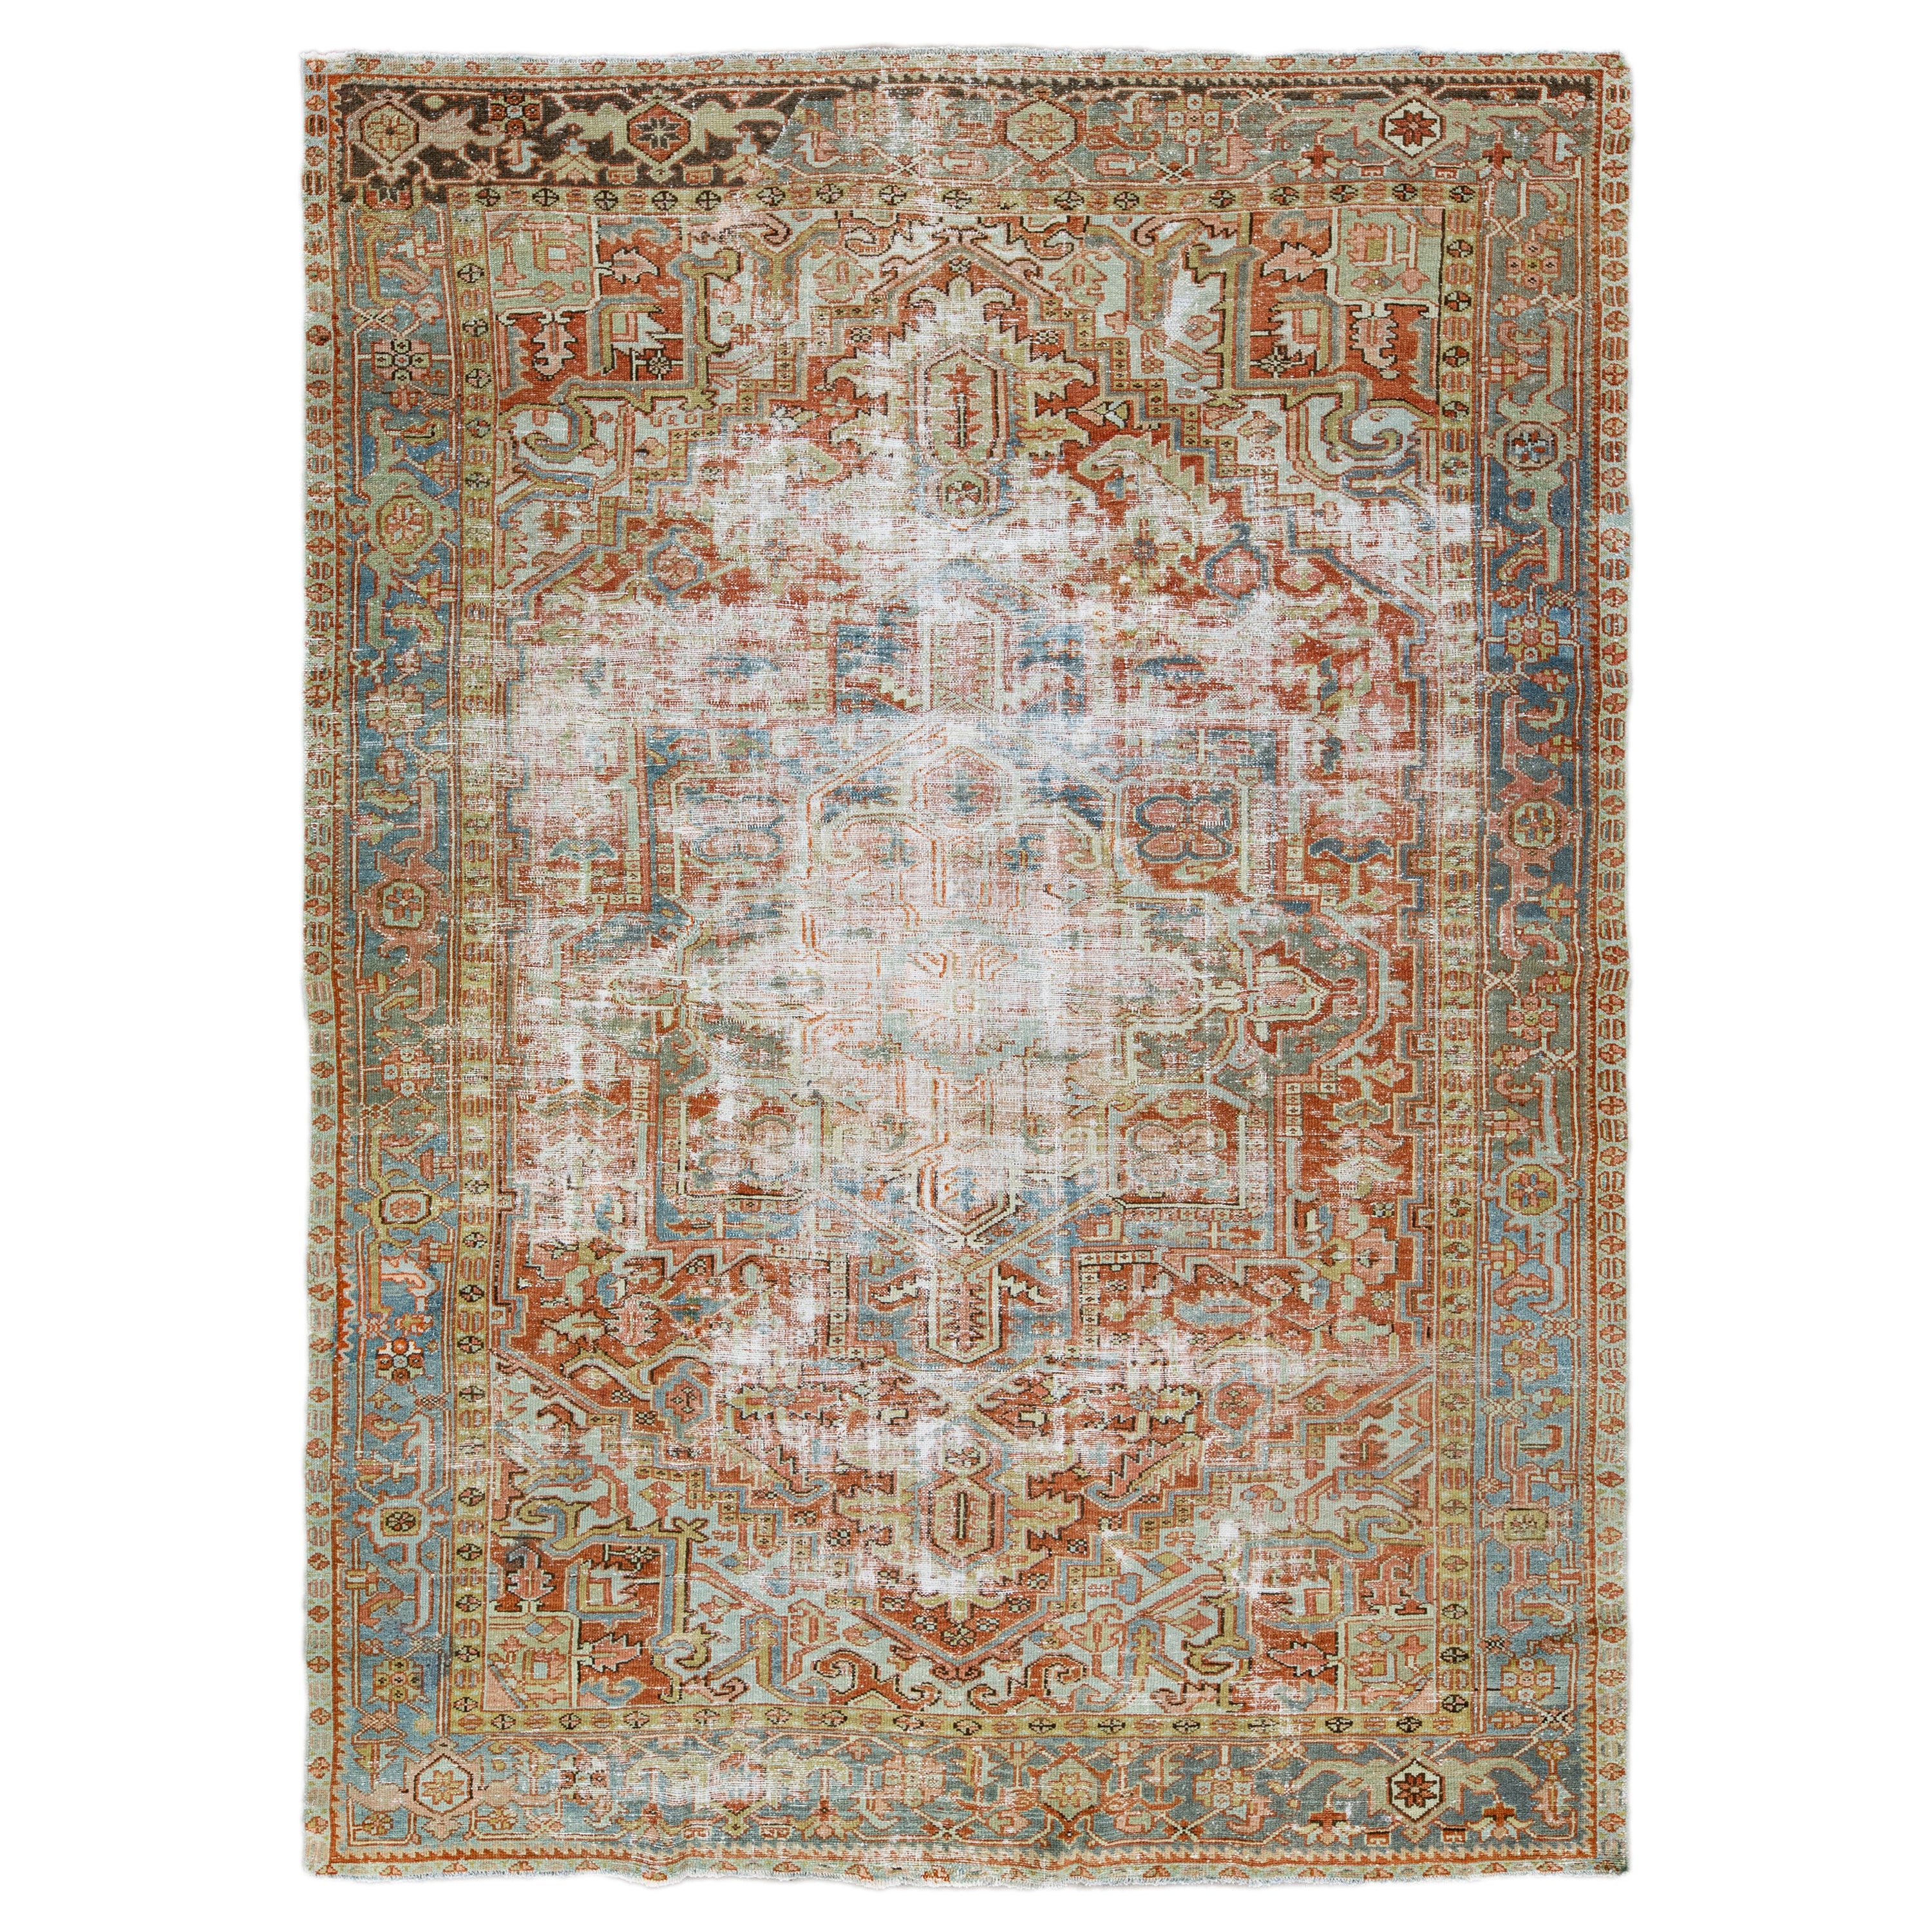 Antique Shabby Chic Persian Heriz Handmade Rusted Wool Rug For Sale